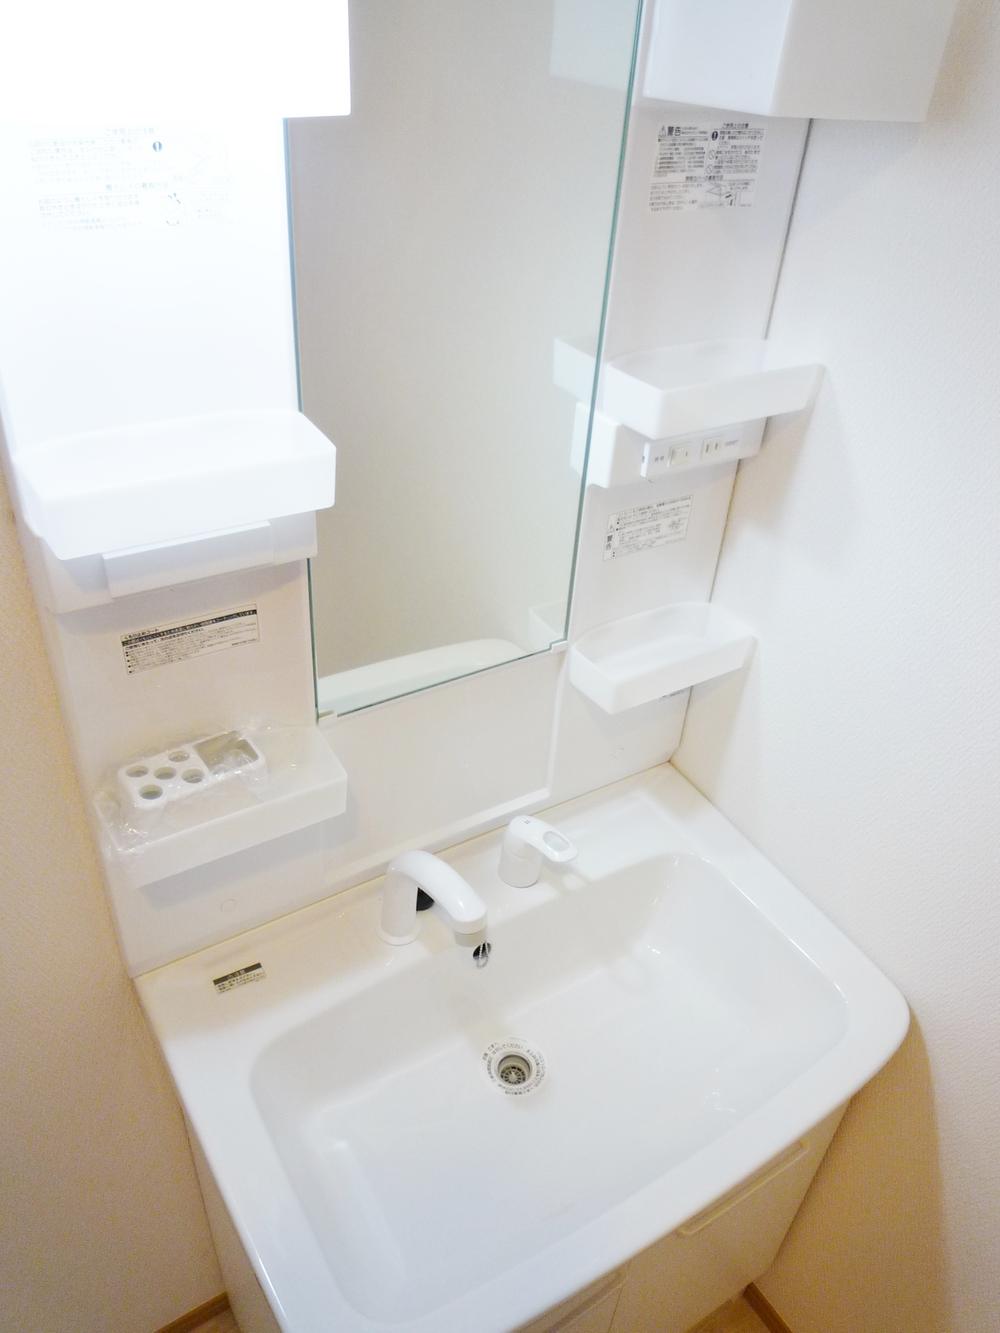 Wash basin, toilet. Wash basin of the same specification